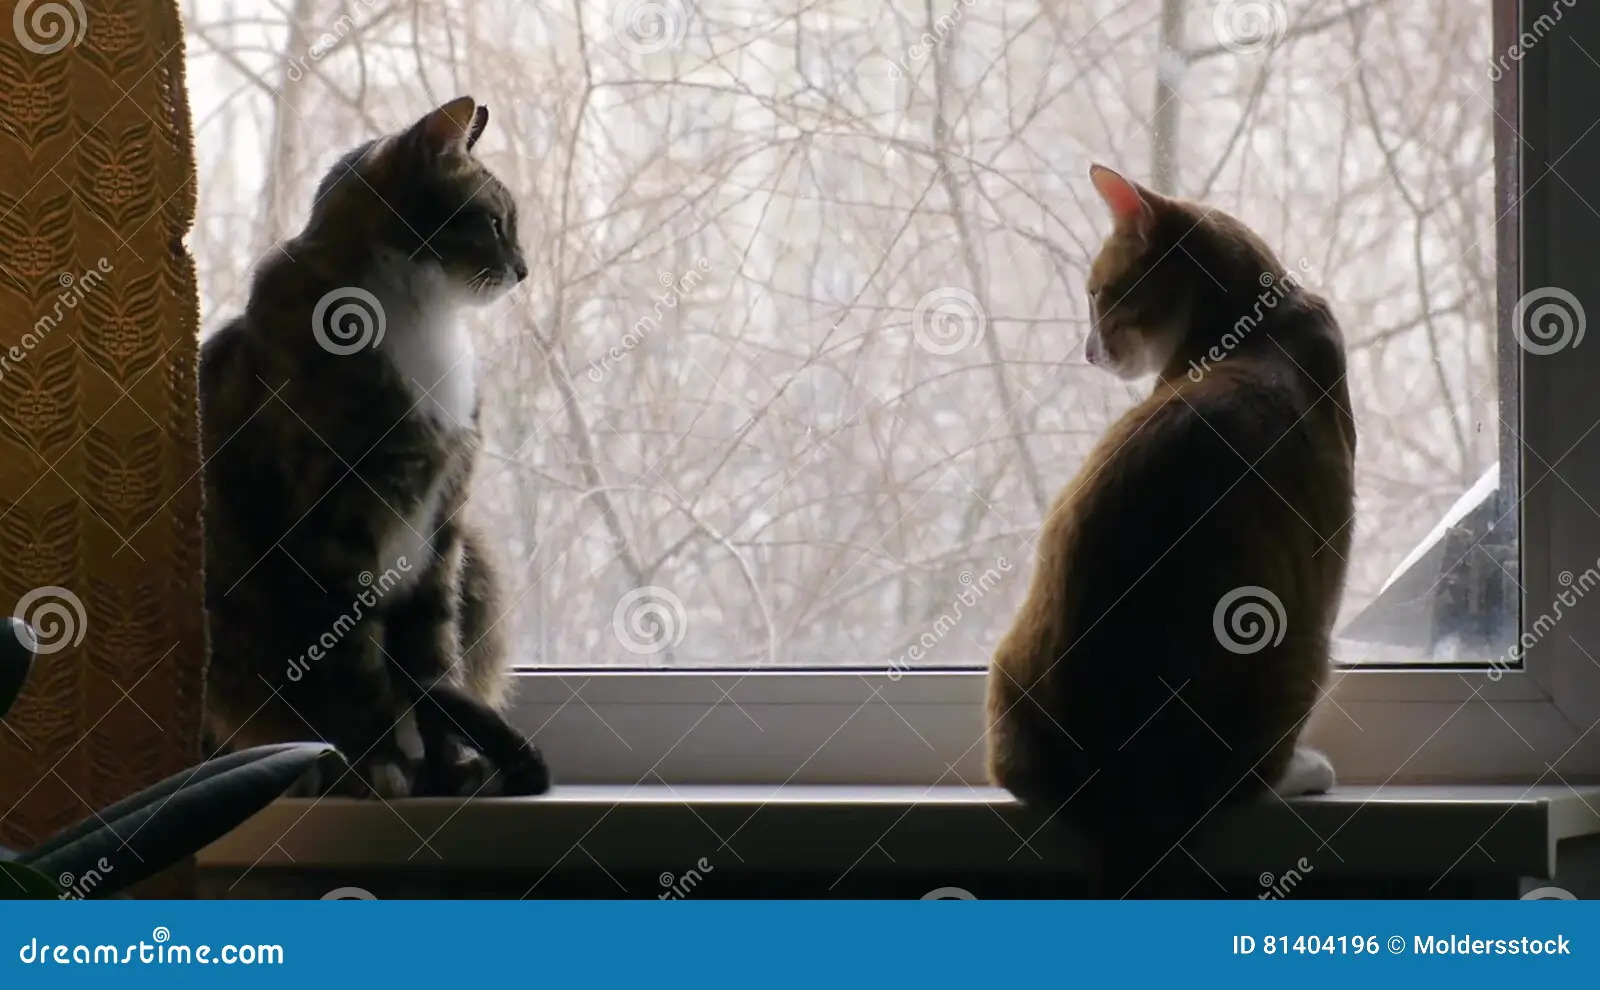 Image Description: Two cats fighting over a shared window view spot